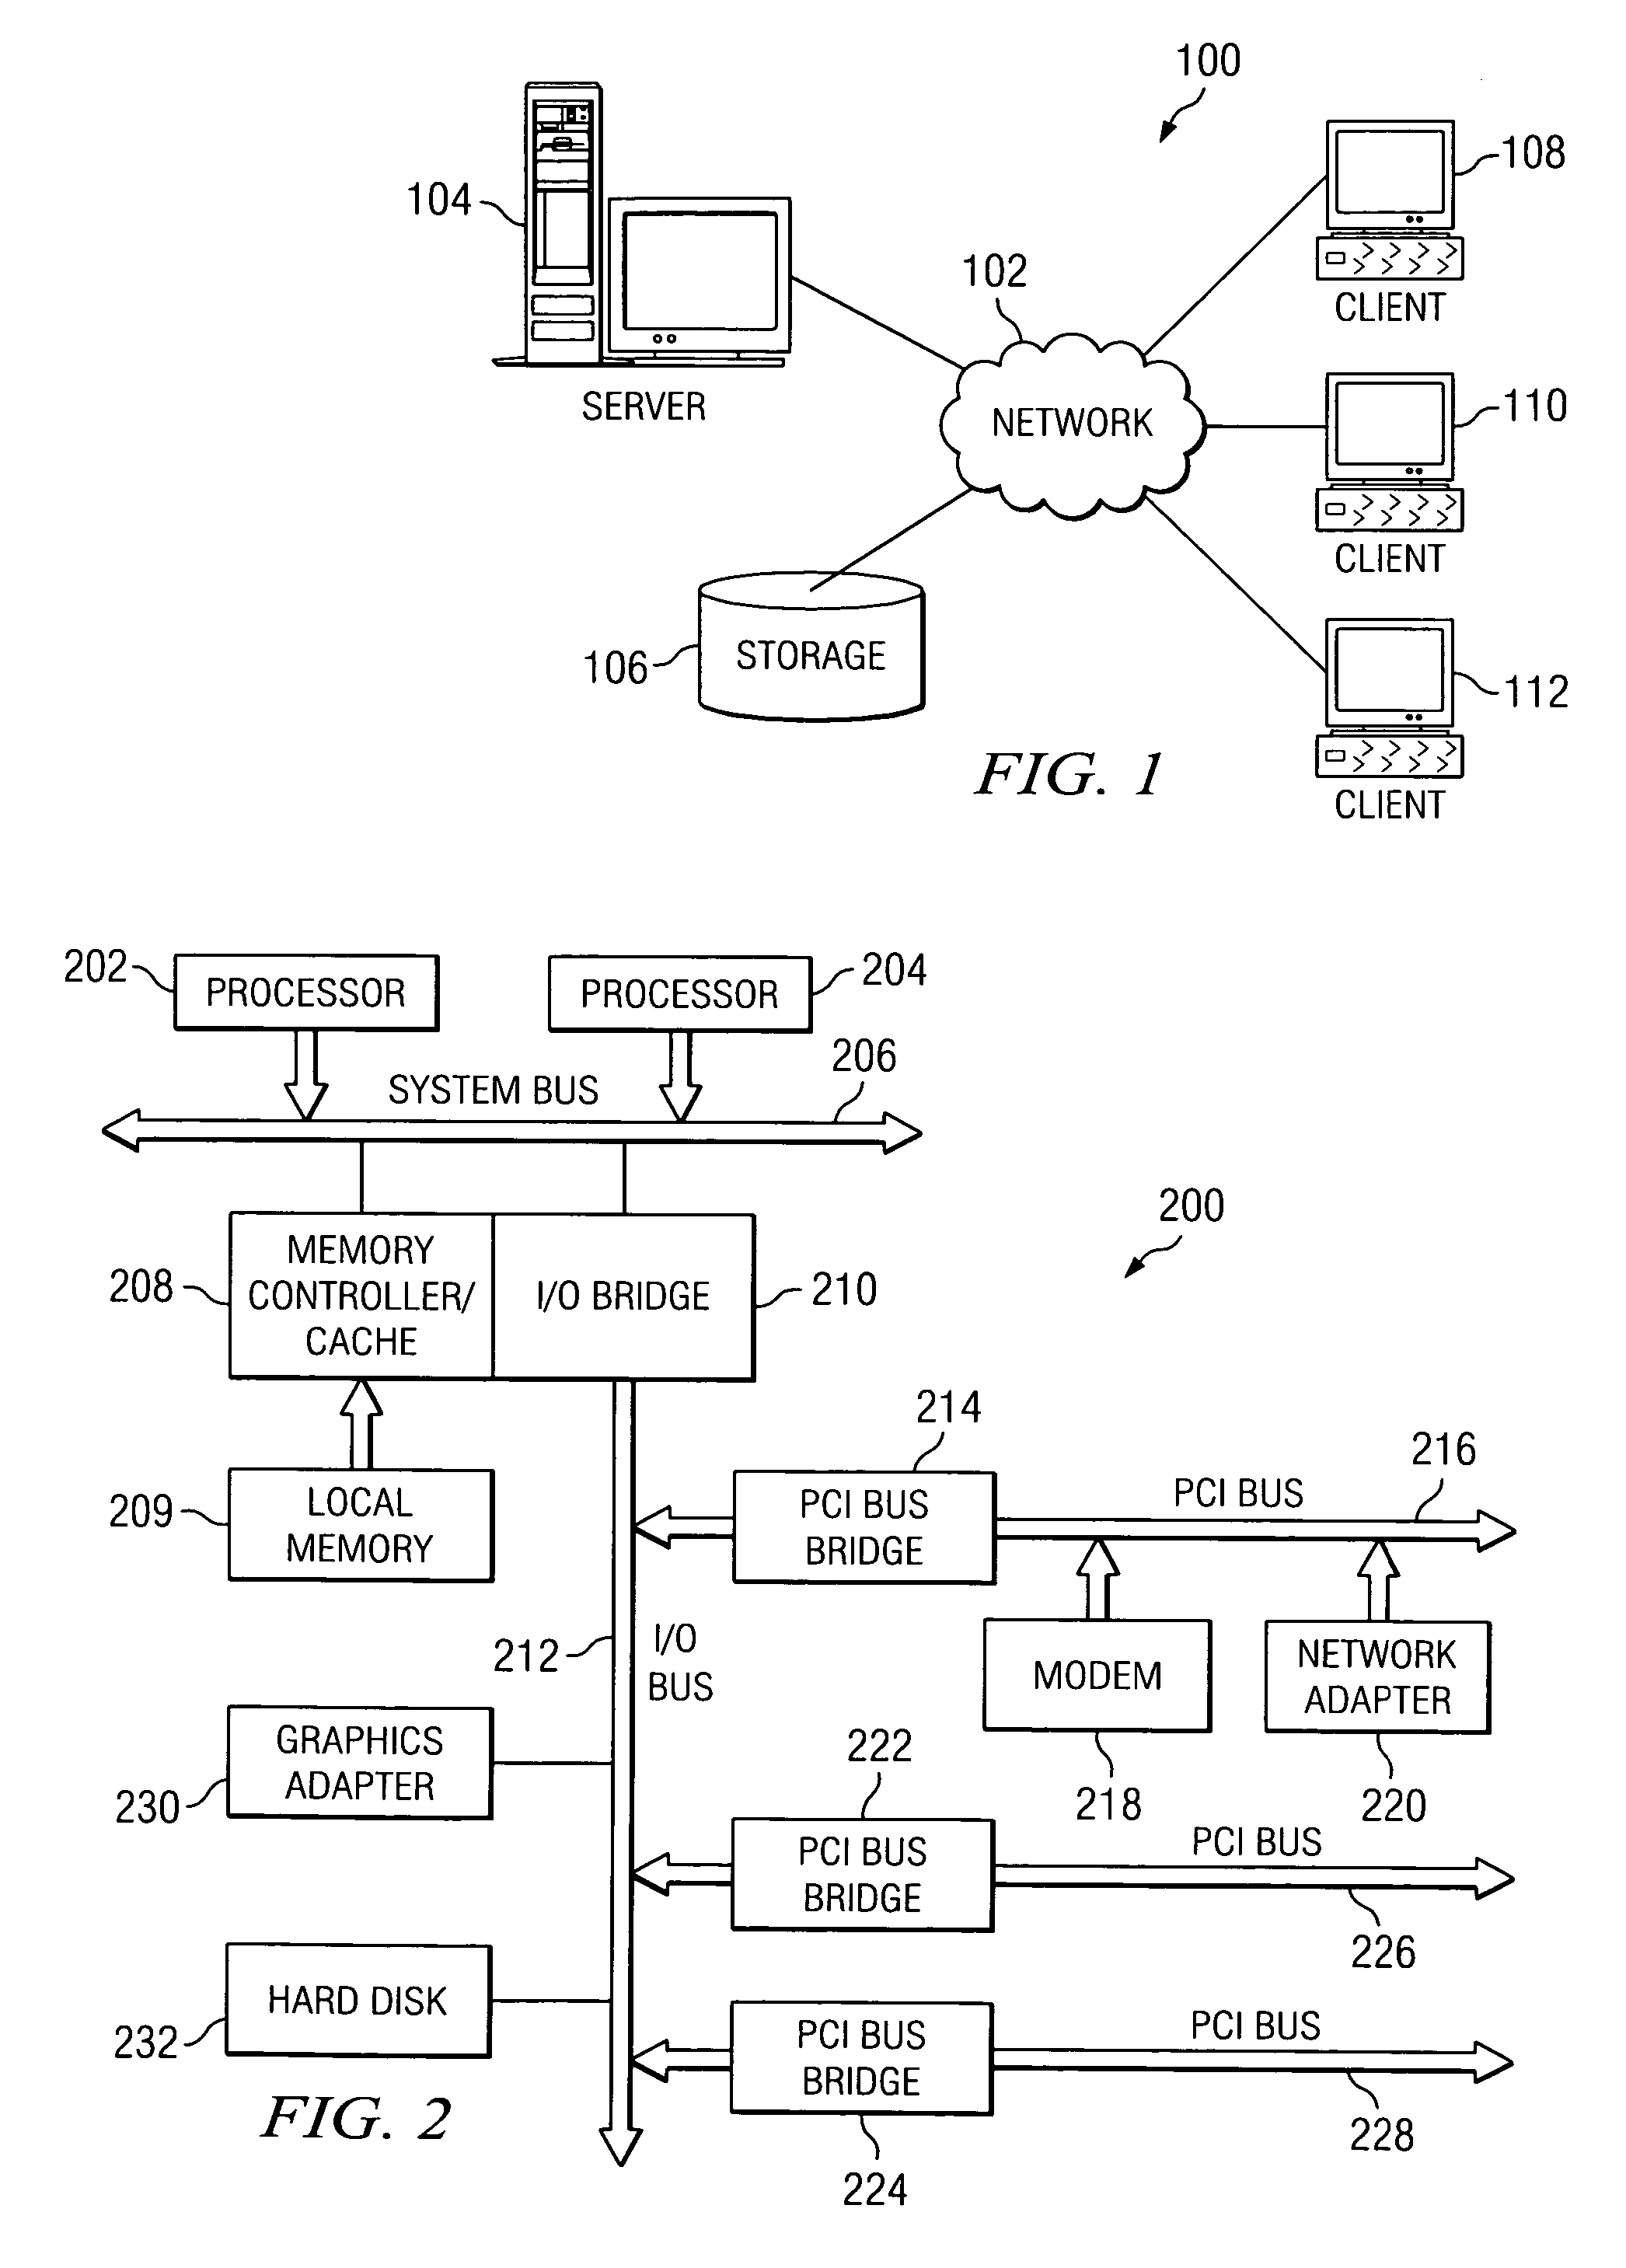 System and method for focused routing of content to dynamically determined groups of reviewers